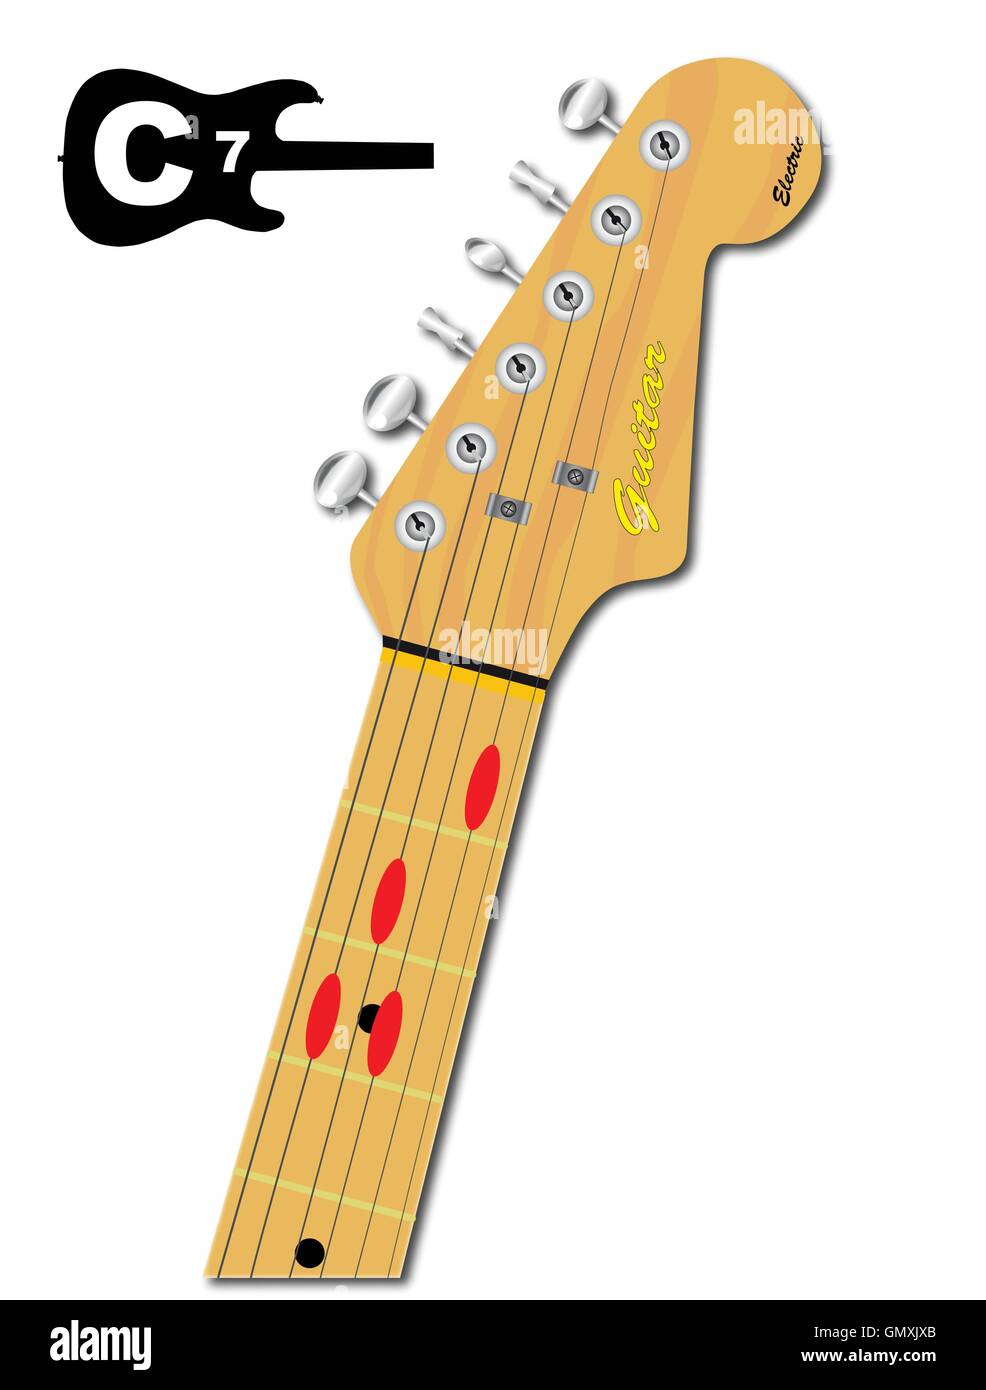 The Guitar Chord Of C Seven Stock Vector